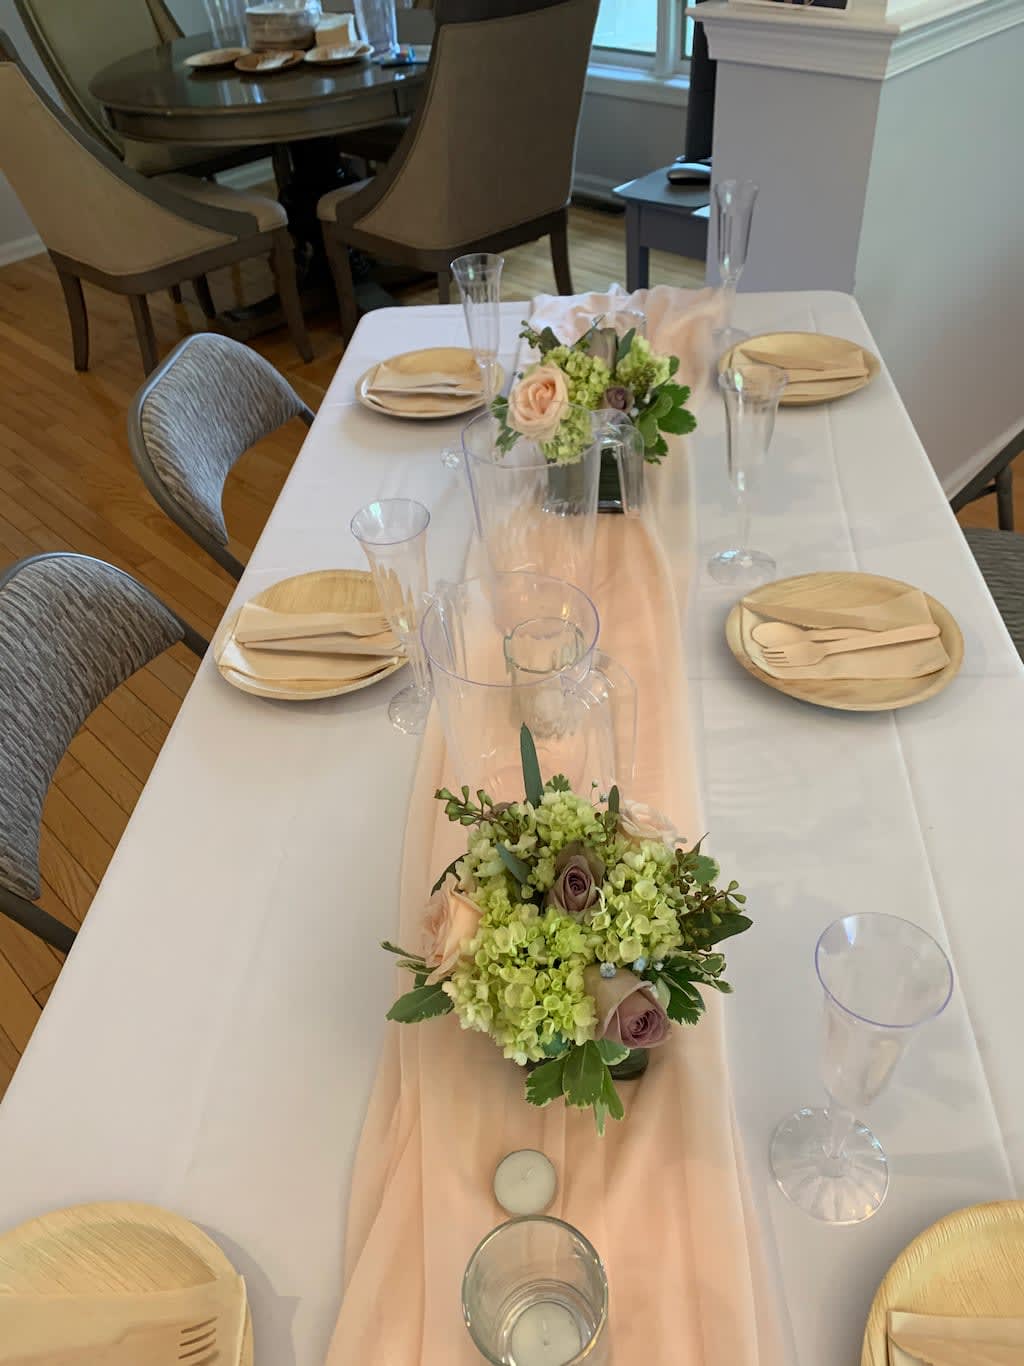 Centerpieces and Table Decor` - Let us assist with planning your event. We can create the theme, you desire with just a conversation.  We can provide flowers, linen, chairs, table flatware, glasses, room decor`.  Call for a detailed consultation.  Pricing varies, actual price below is not price for any event.